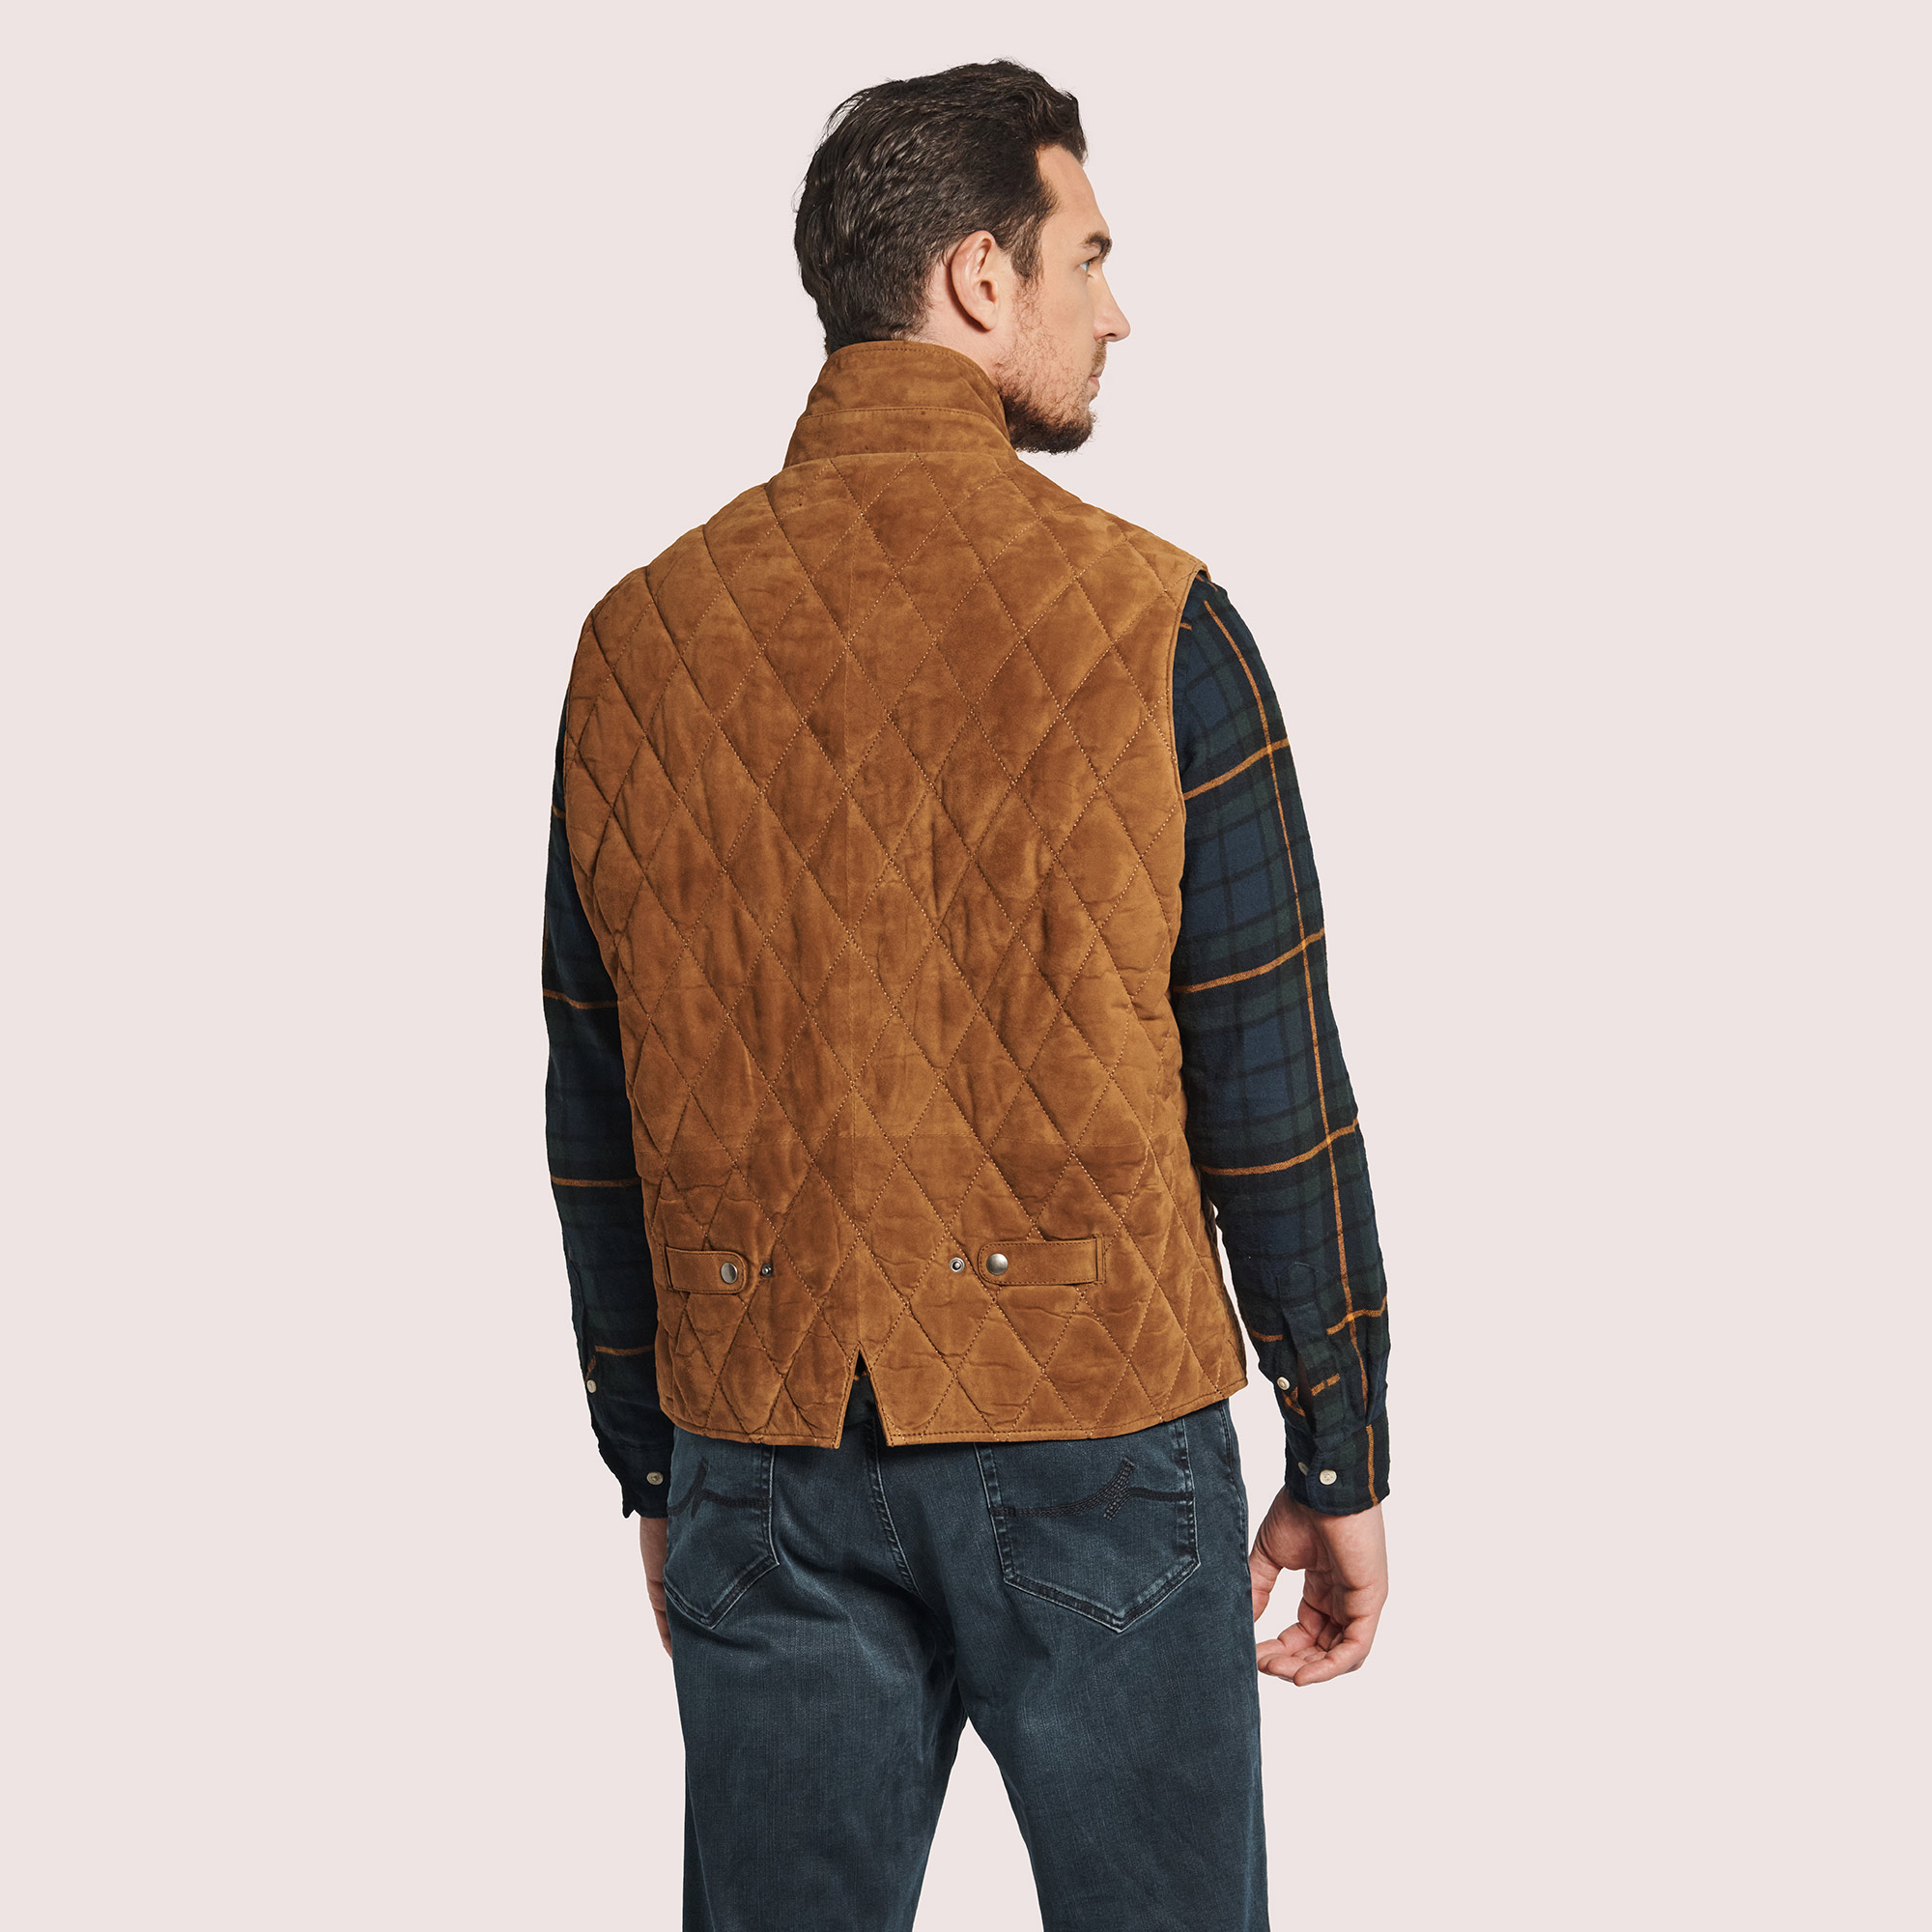 Adrian Goat Suede Quilted Vest